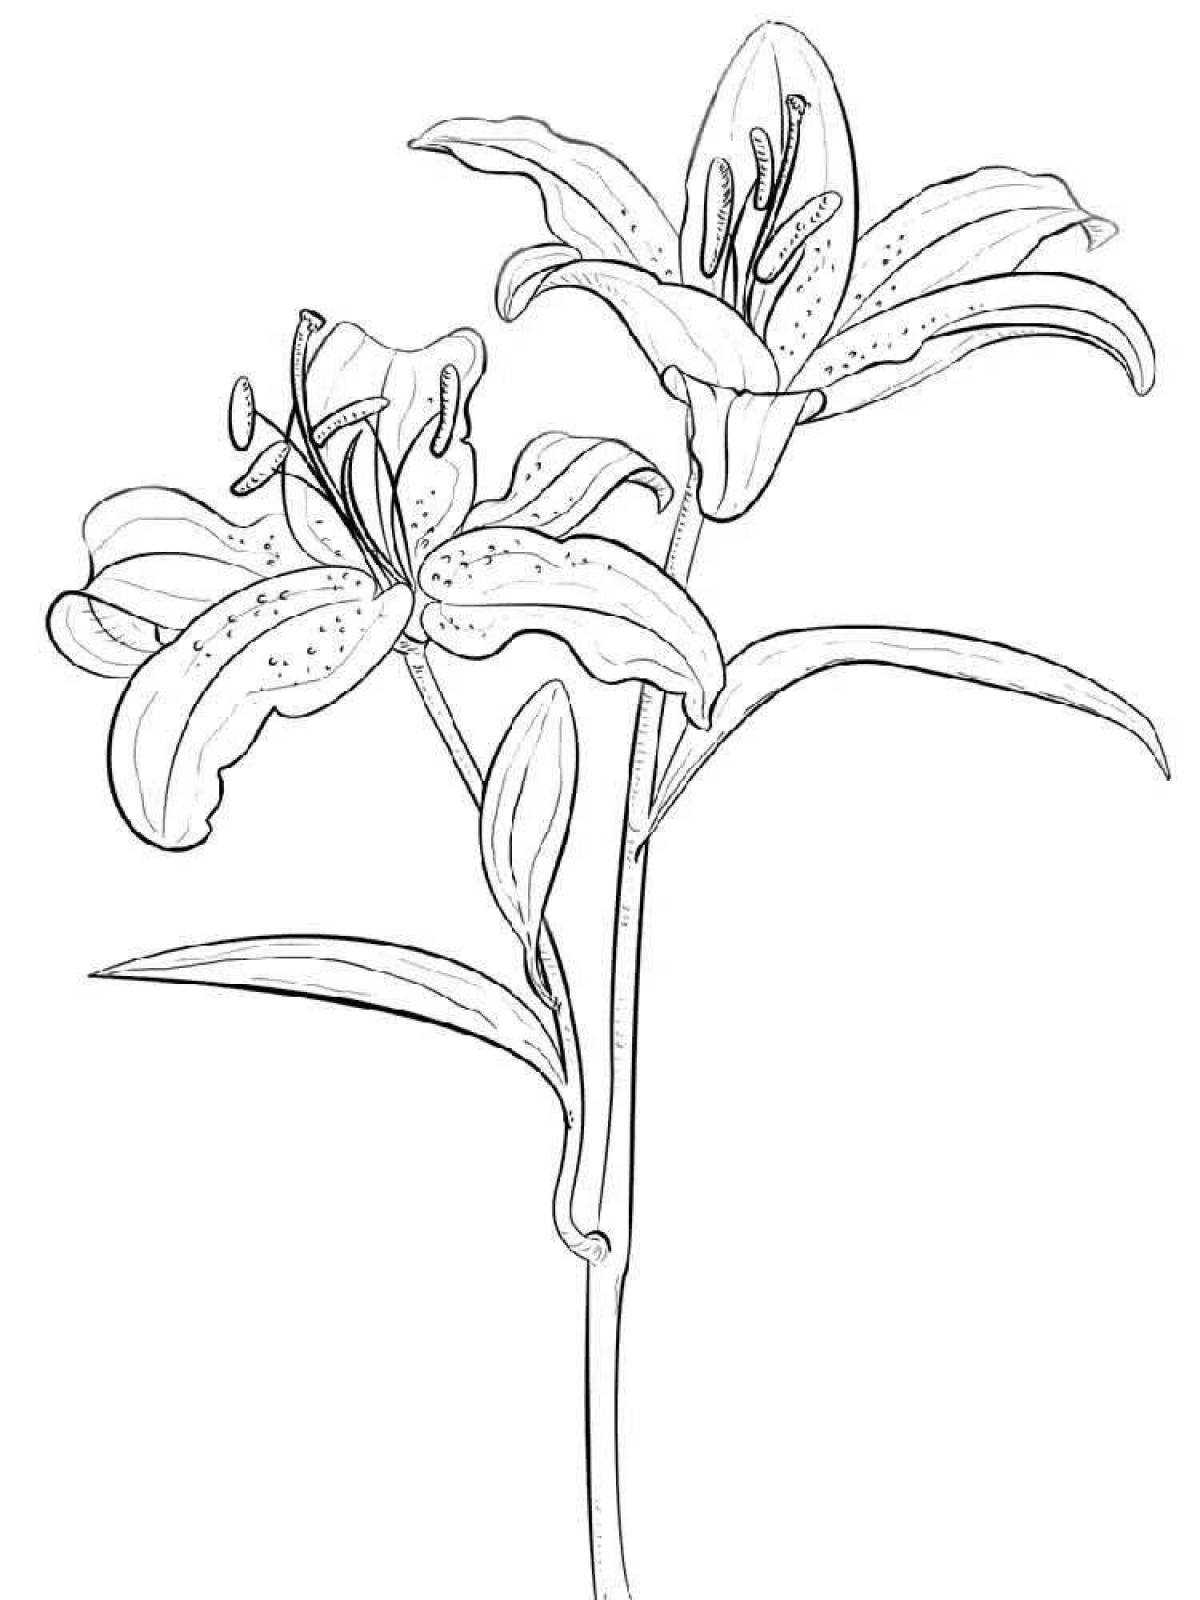 Luminous lily coloring page